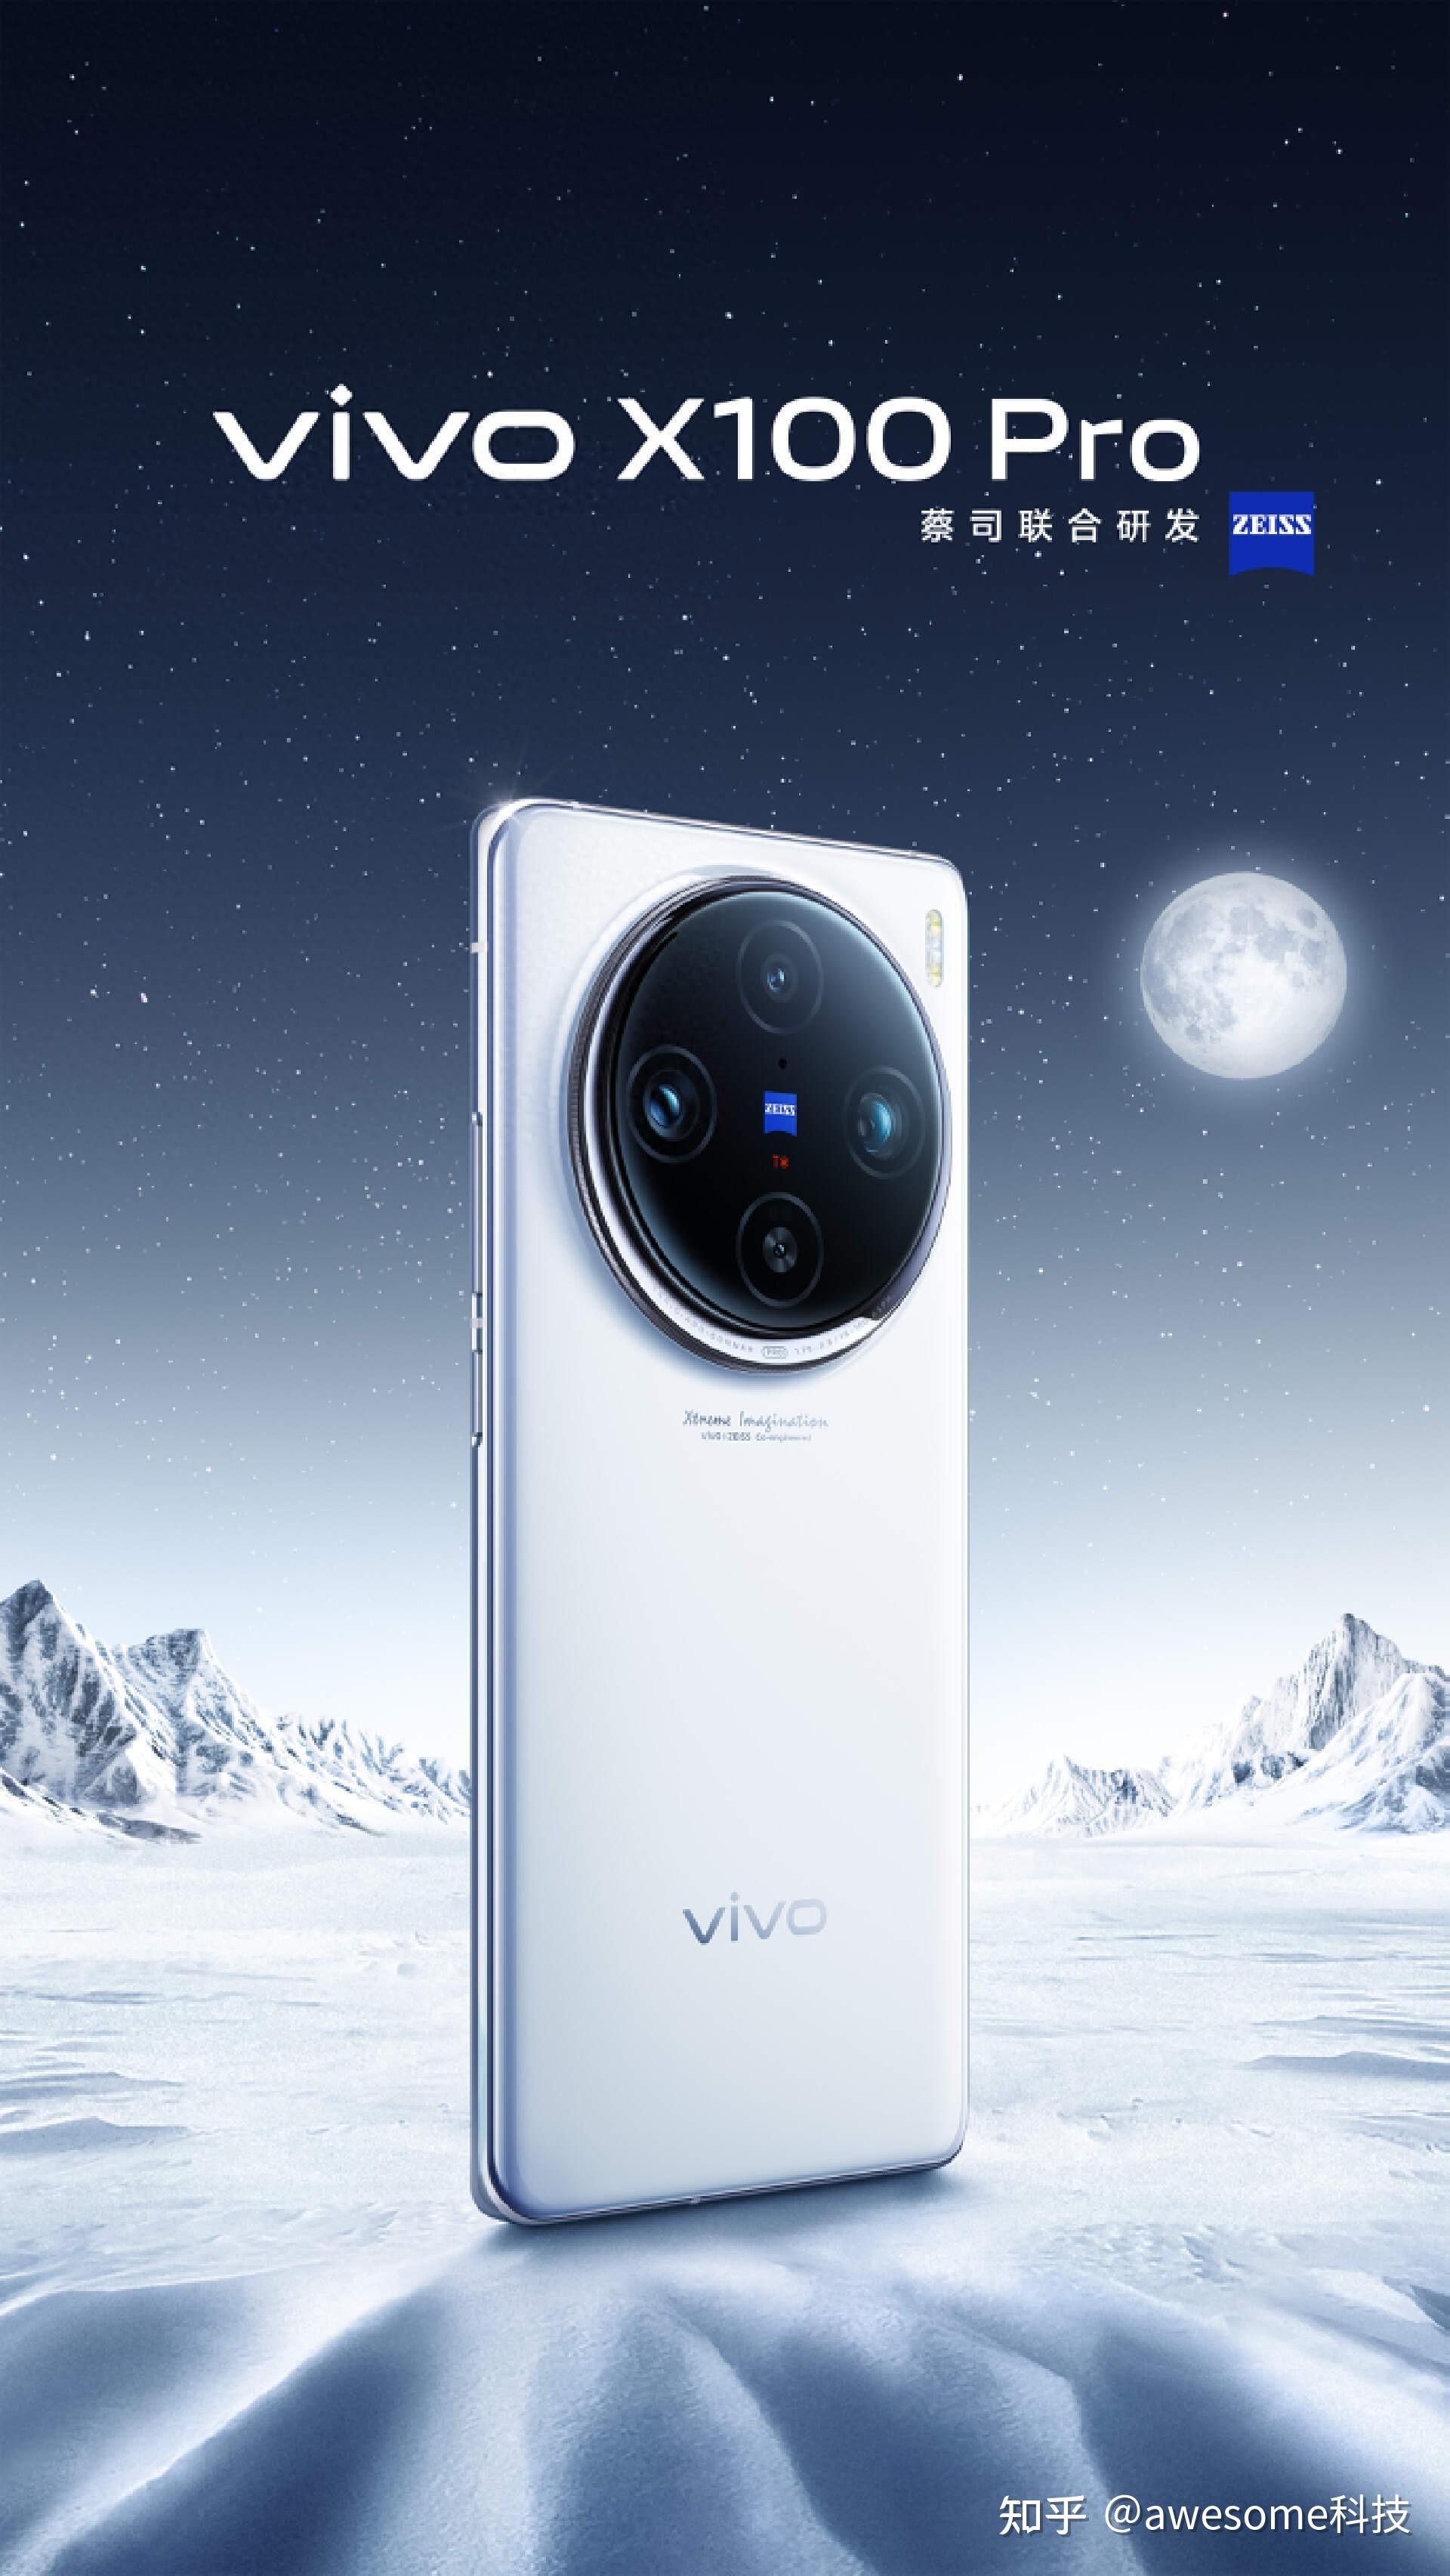 vivo X100 Pro launched globally: flagship smartphone with ZEISS camera ...